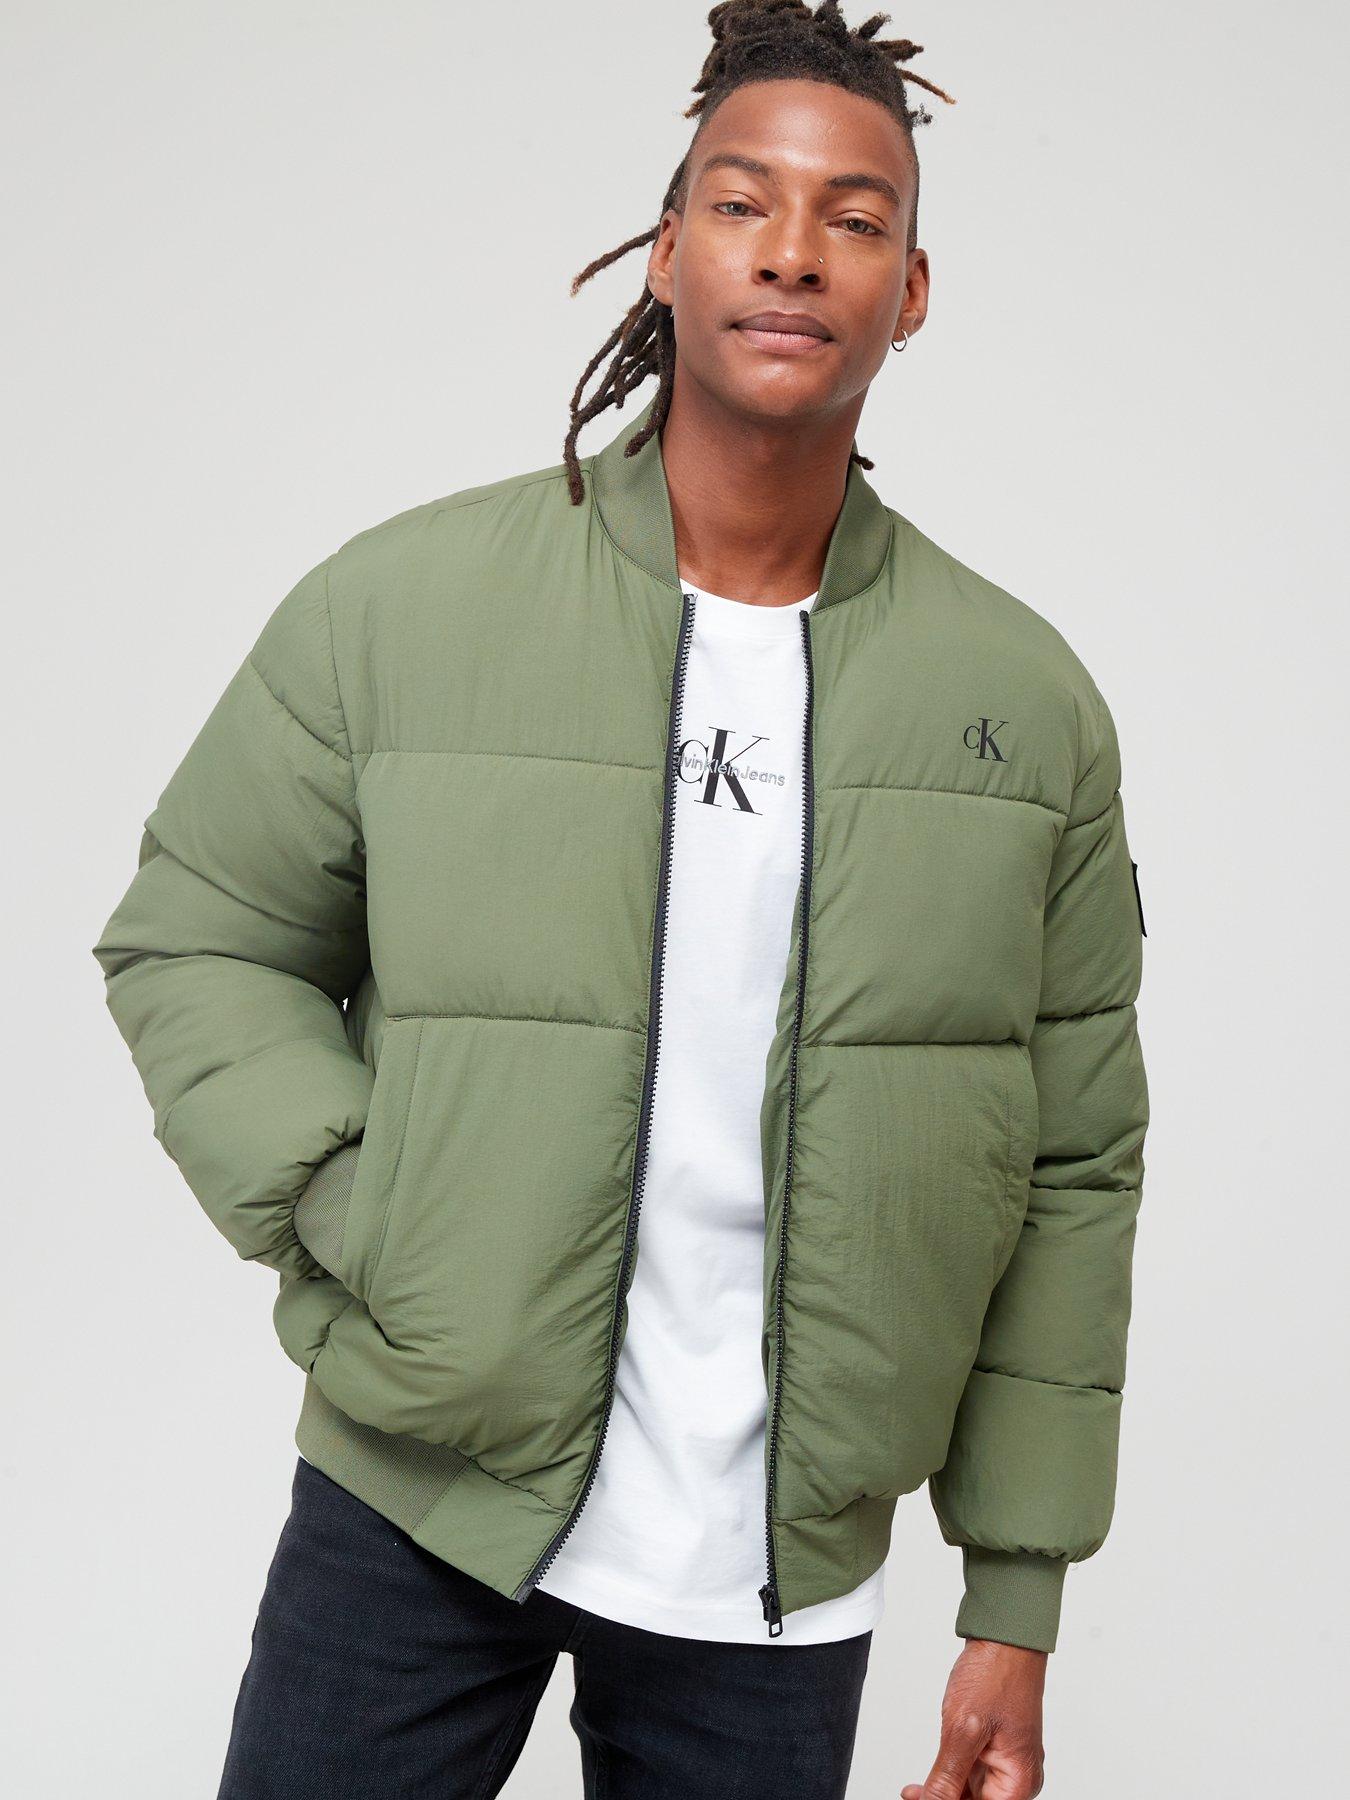 Calvin Klein Jeans commercial bomber jacket in thyme green